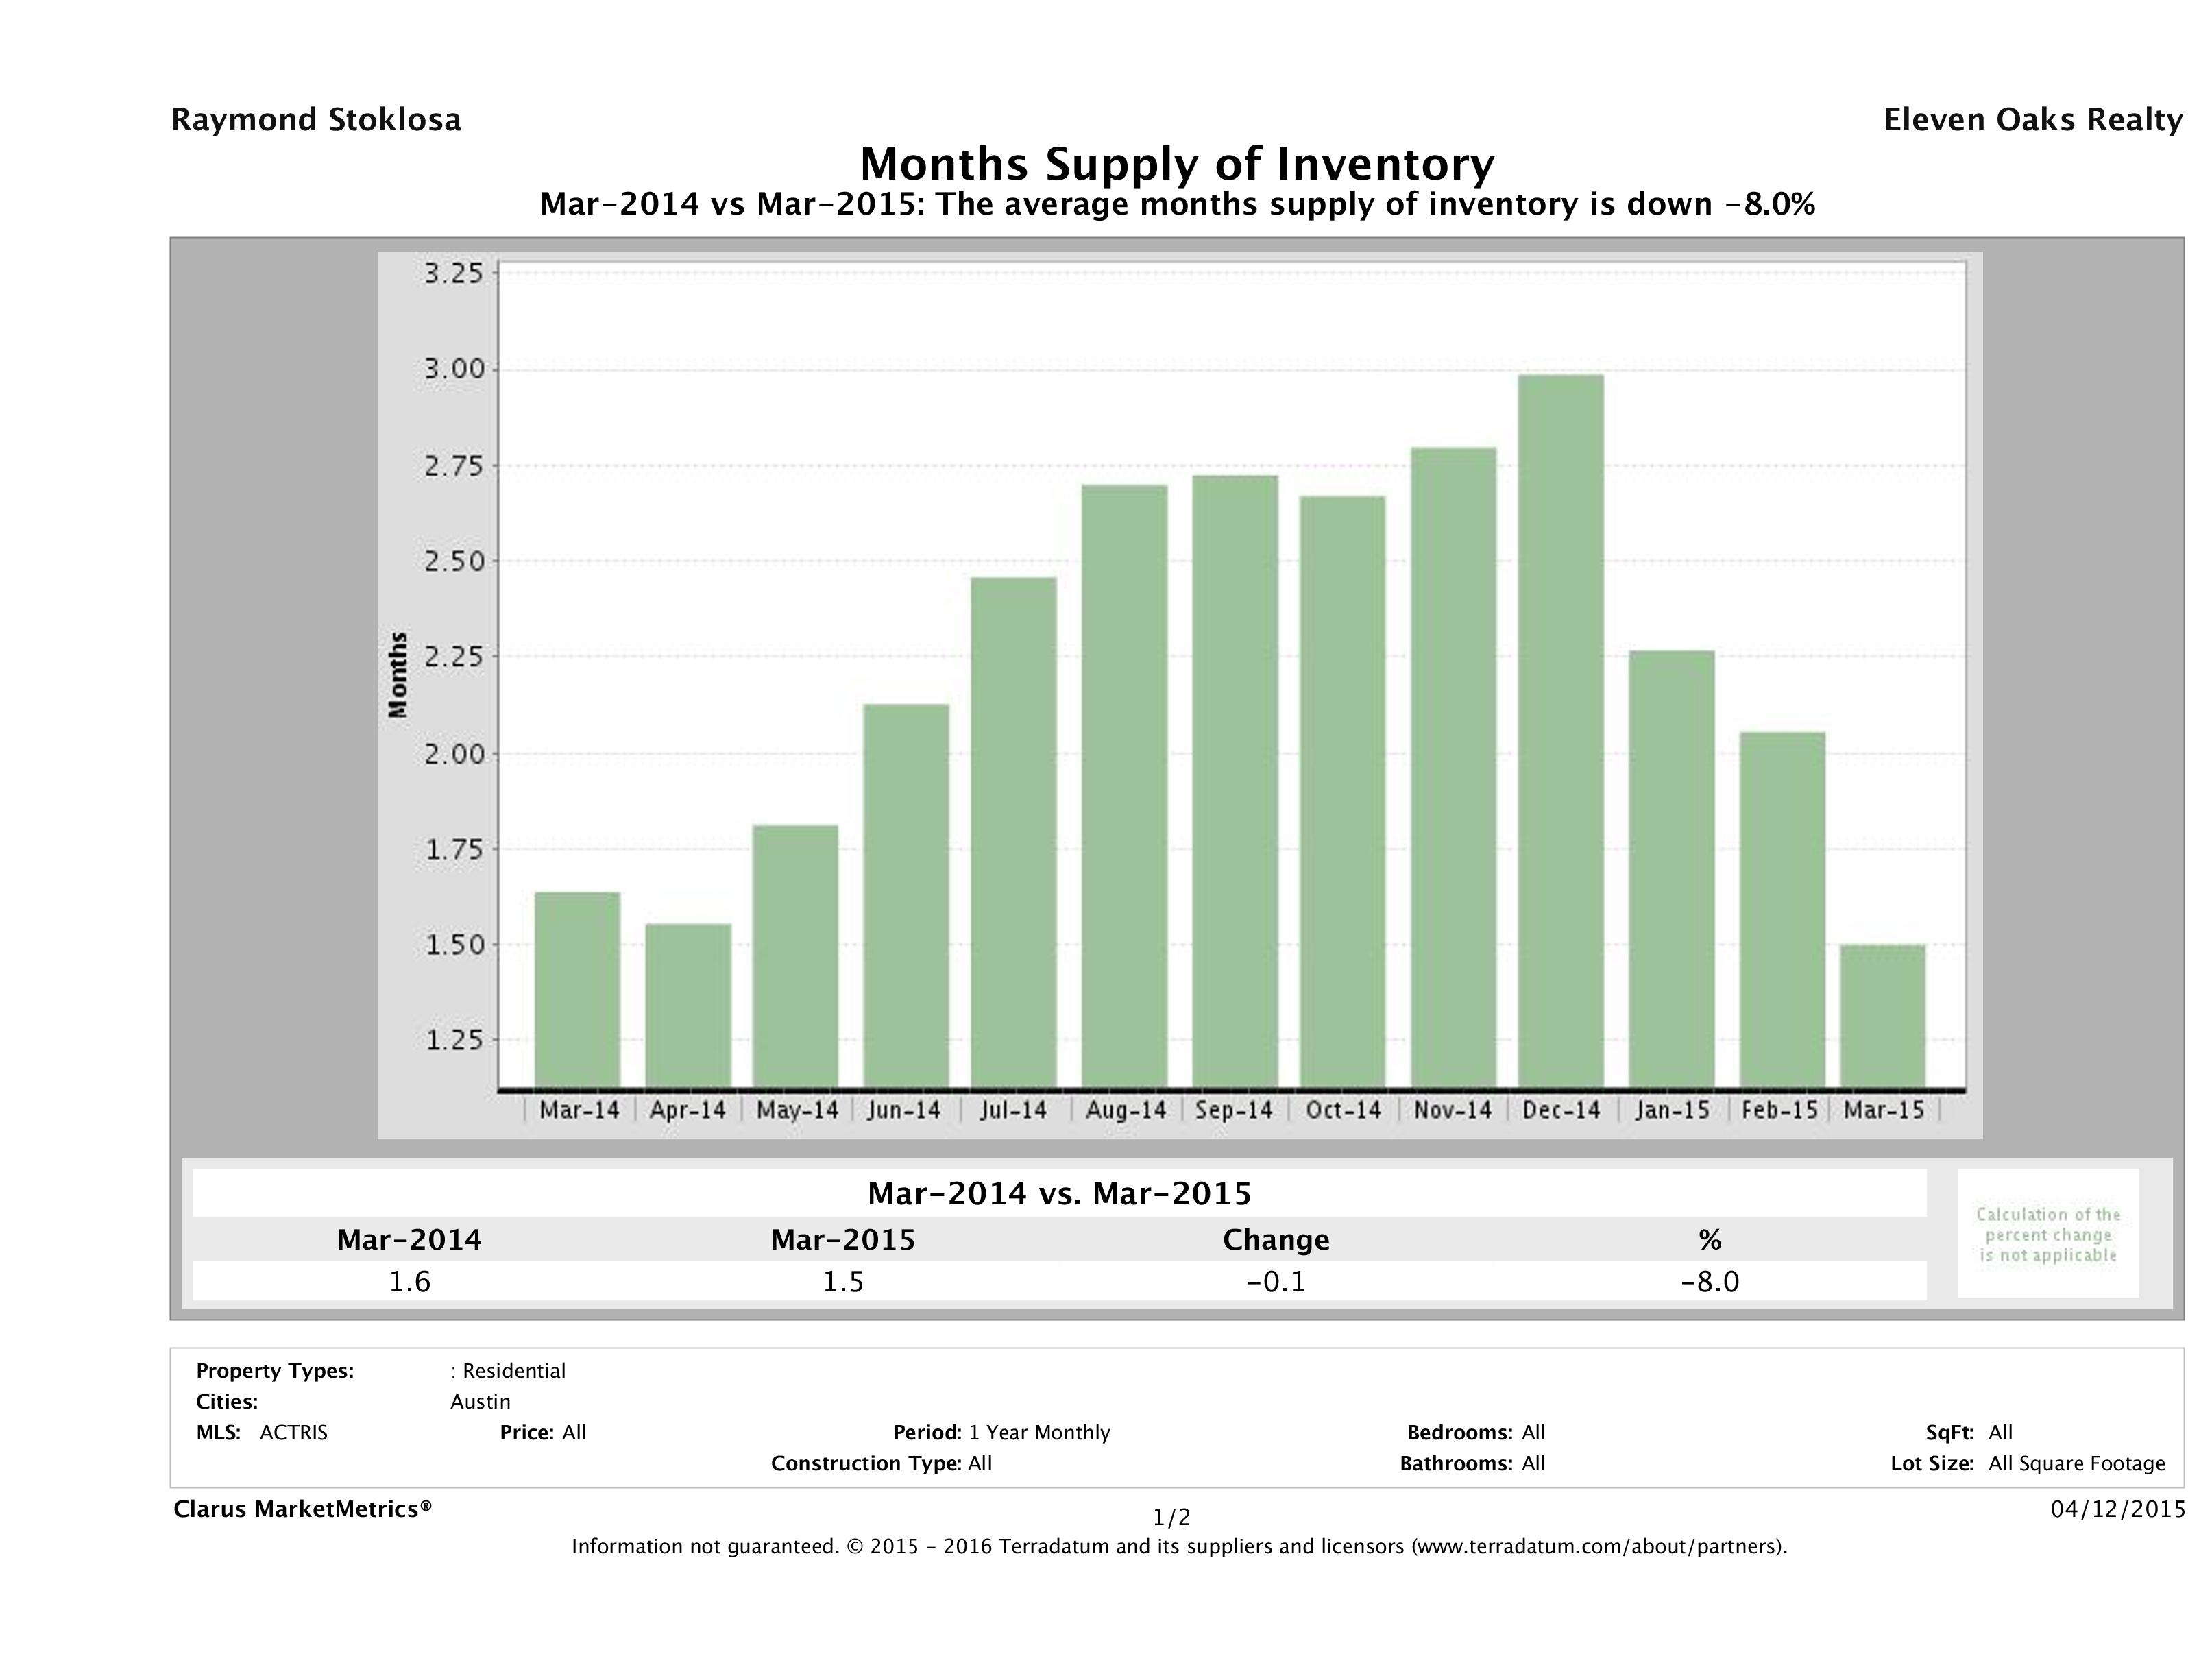 Austin single family home months inventory March 2015